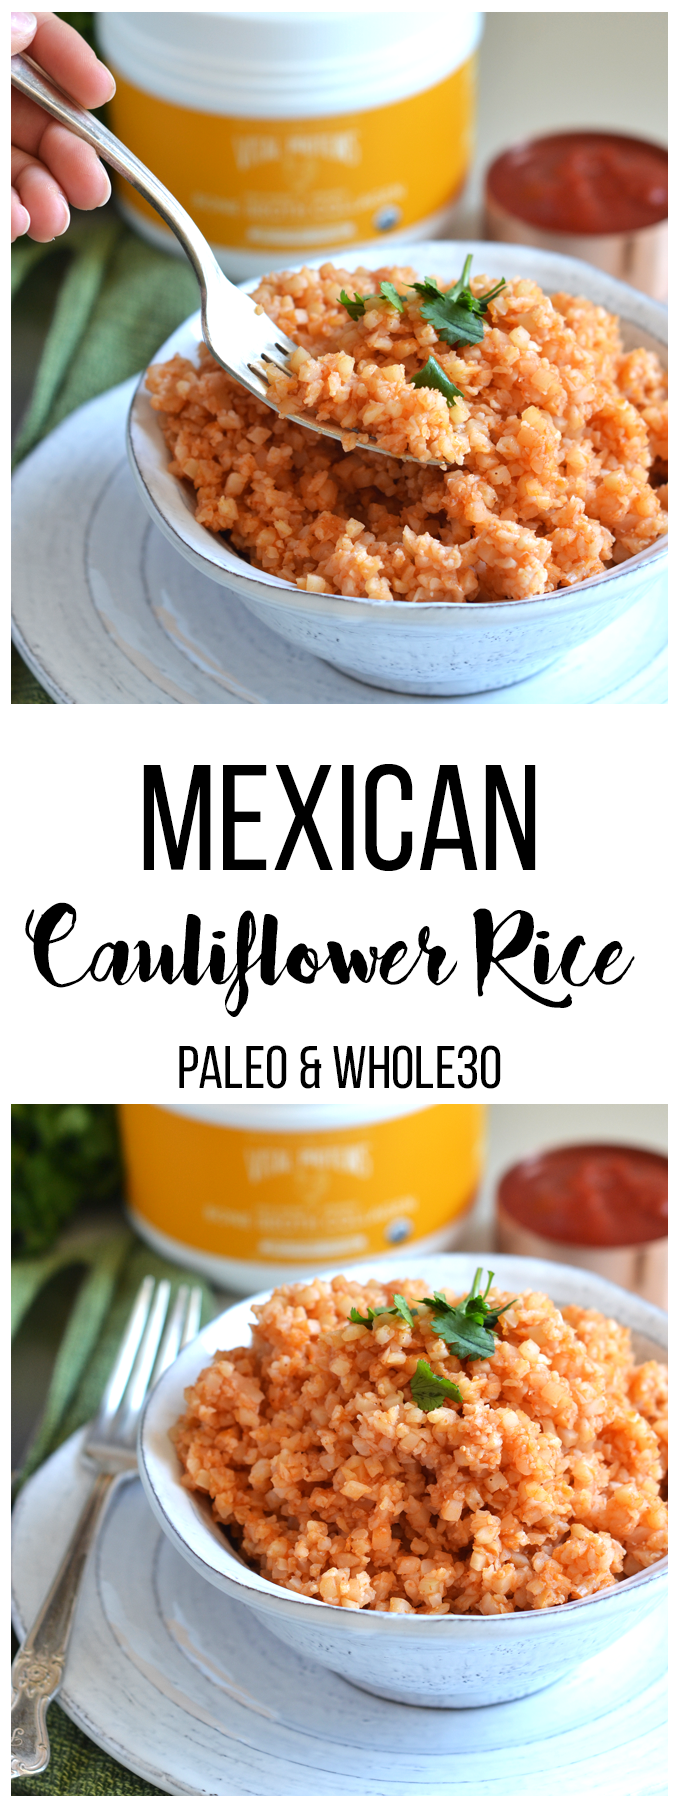 This Mexican Cauliflower Rice is the perfect way to enjoy the authentic mexican rice flavors with a healthy and paleo twist!